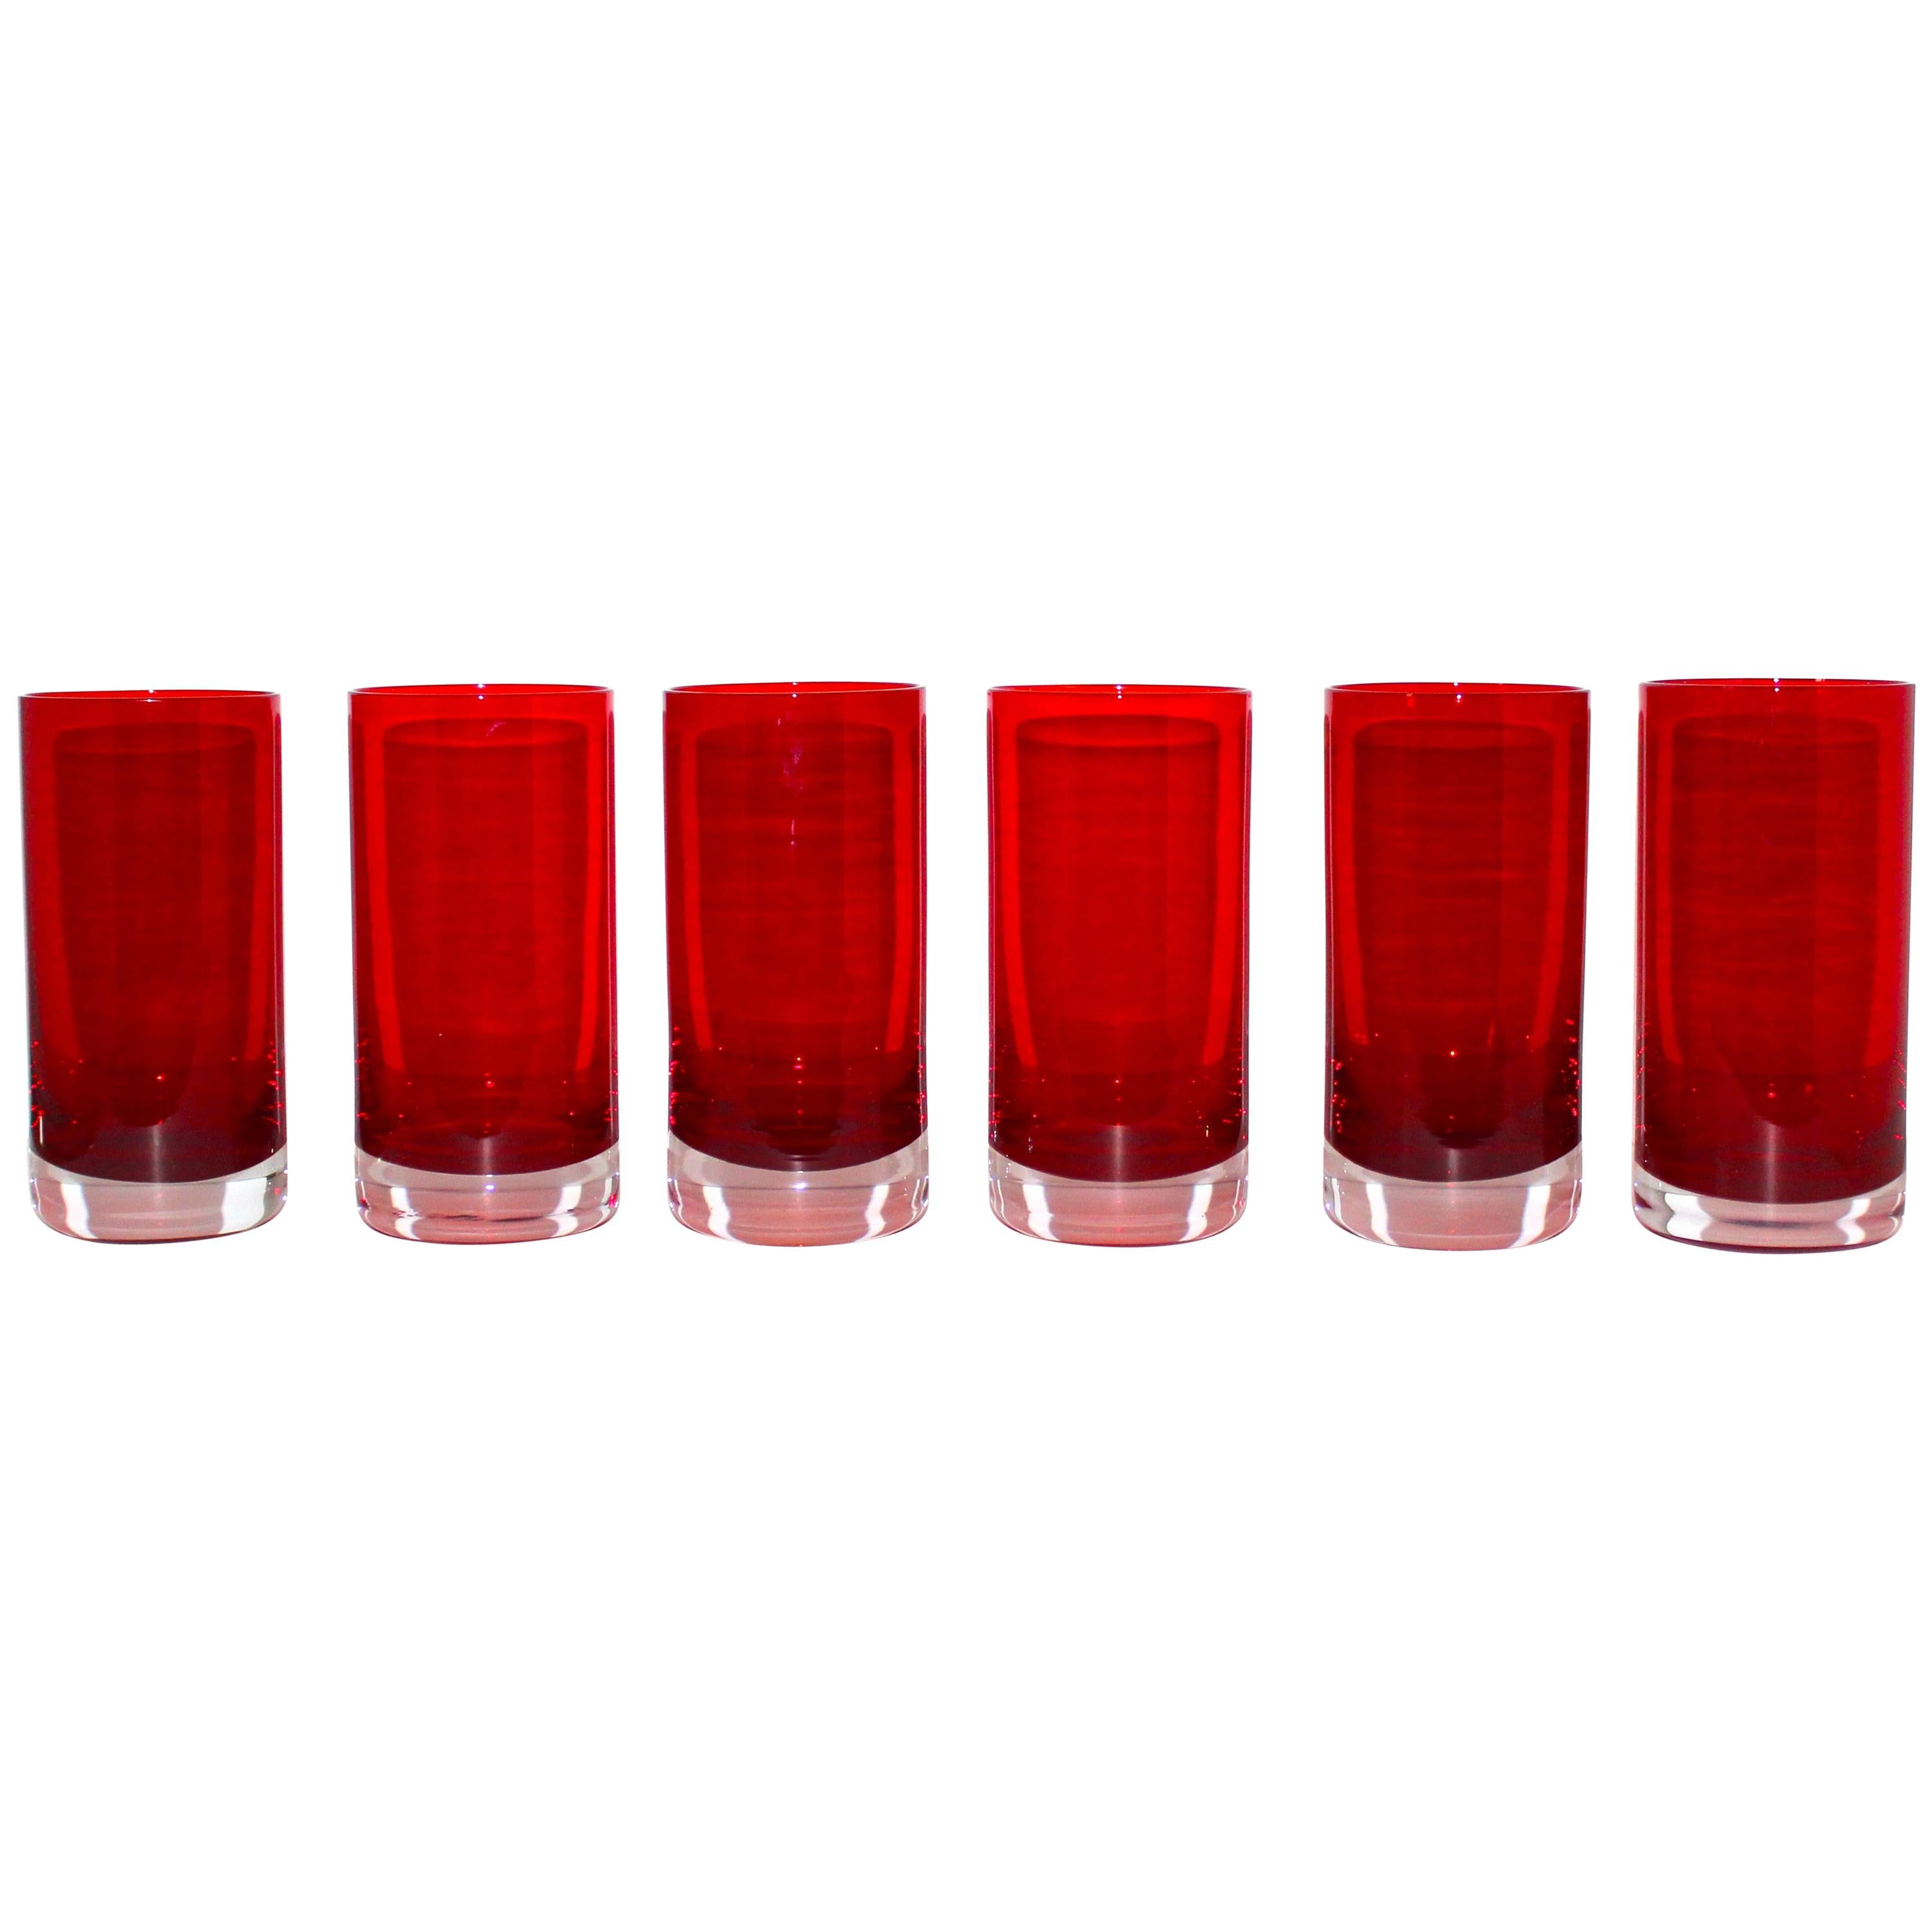 Set of Six Vintage Murano Sommerso Highball Glasses in Red, circa 1970s